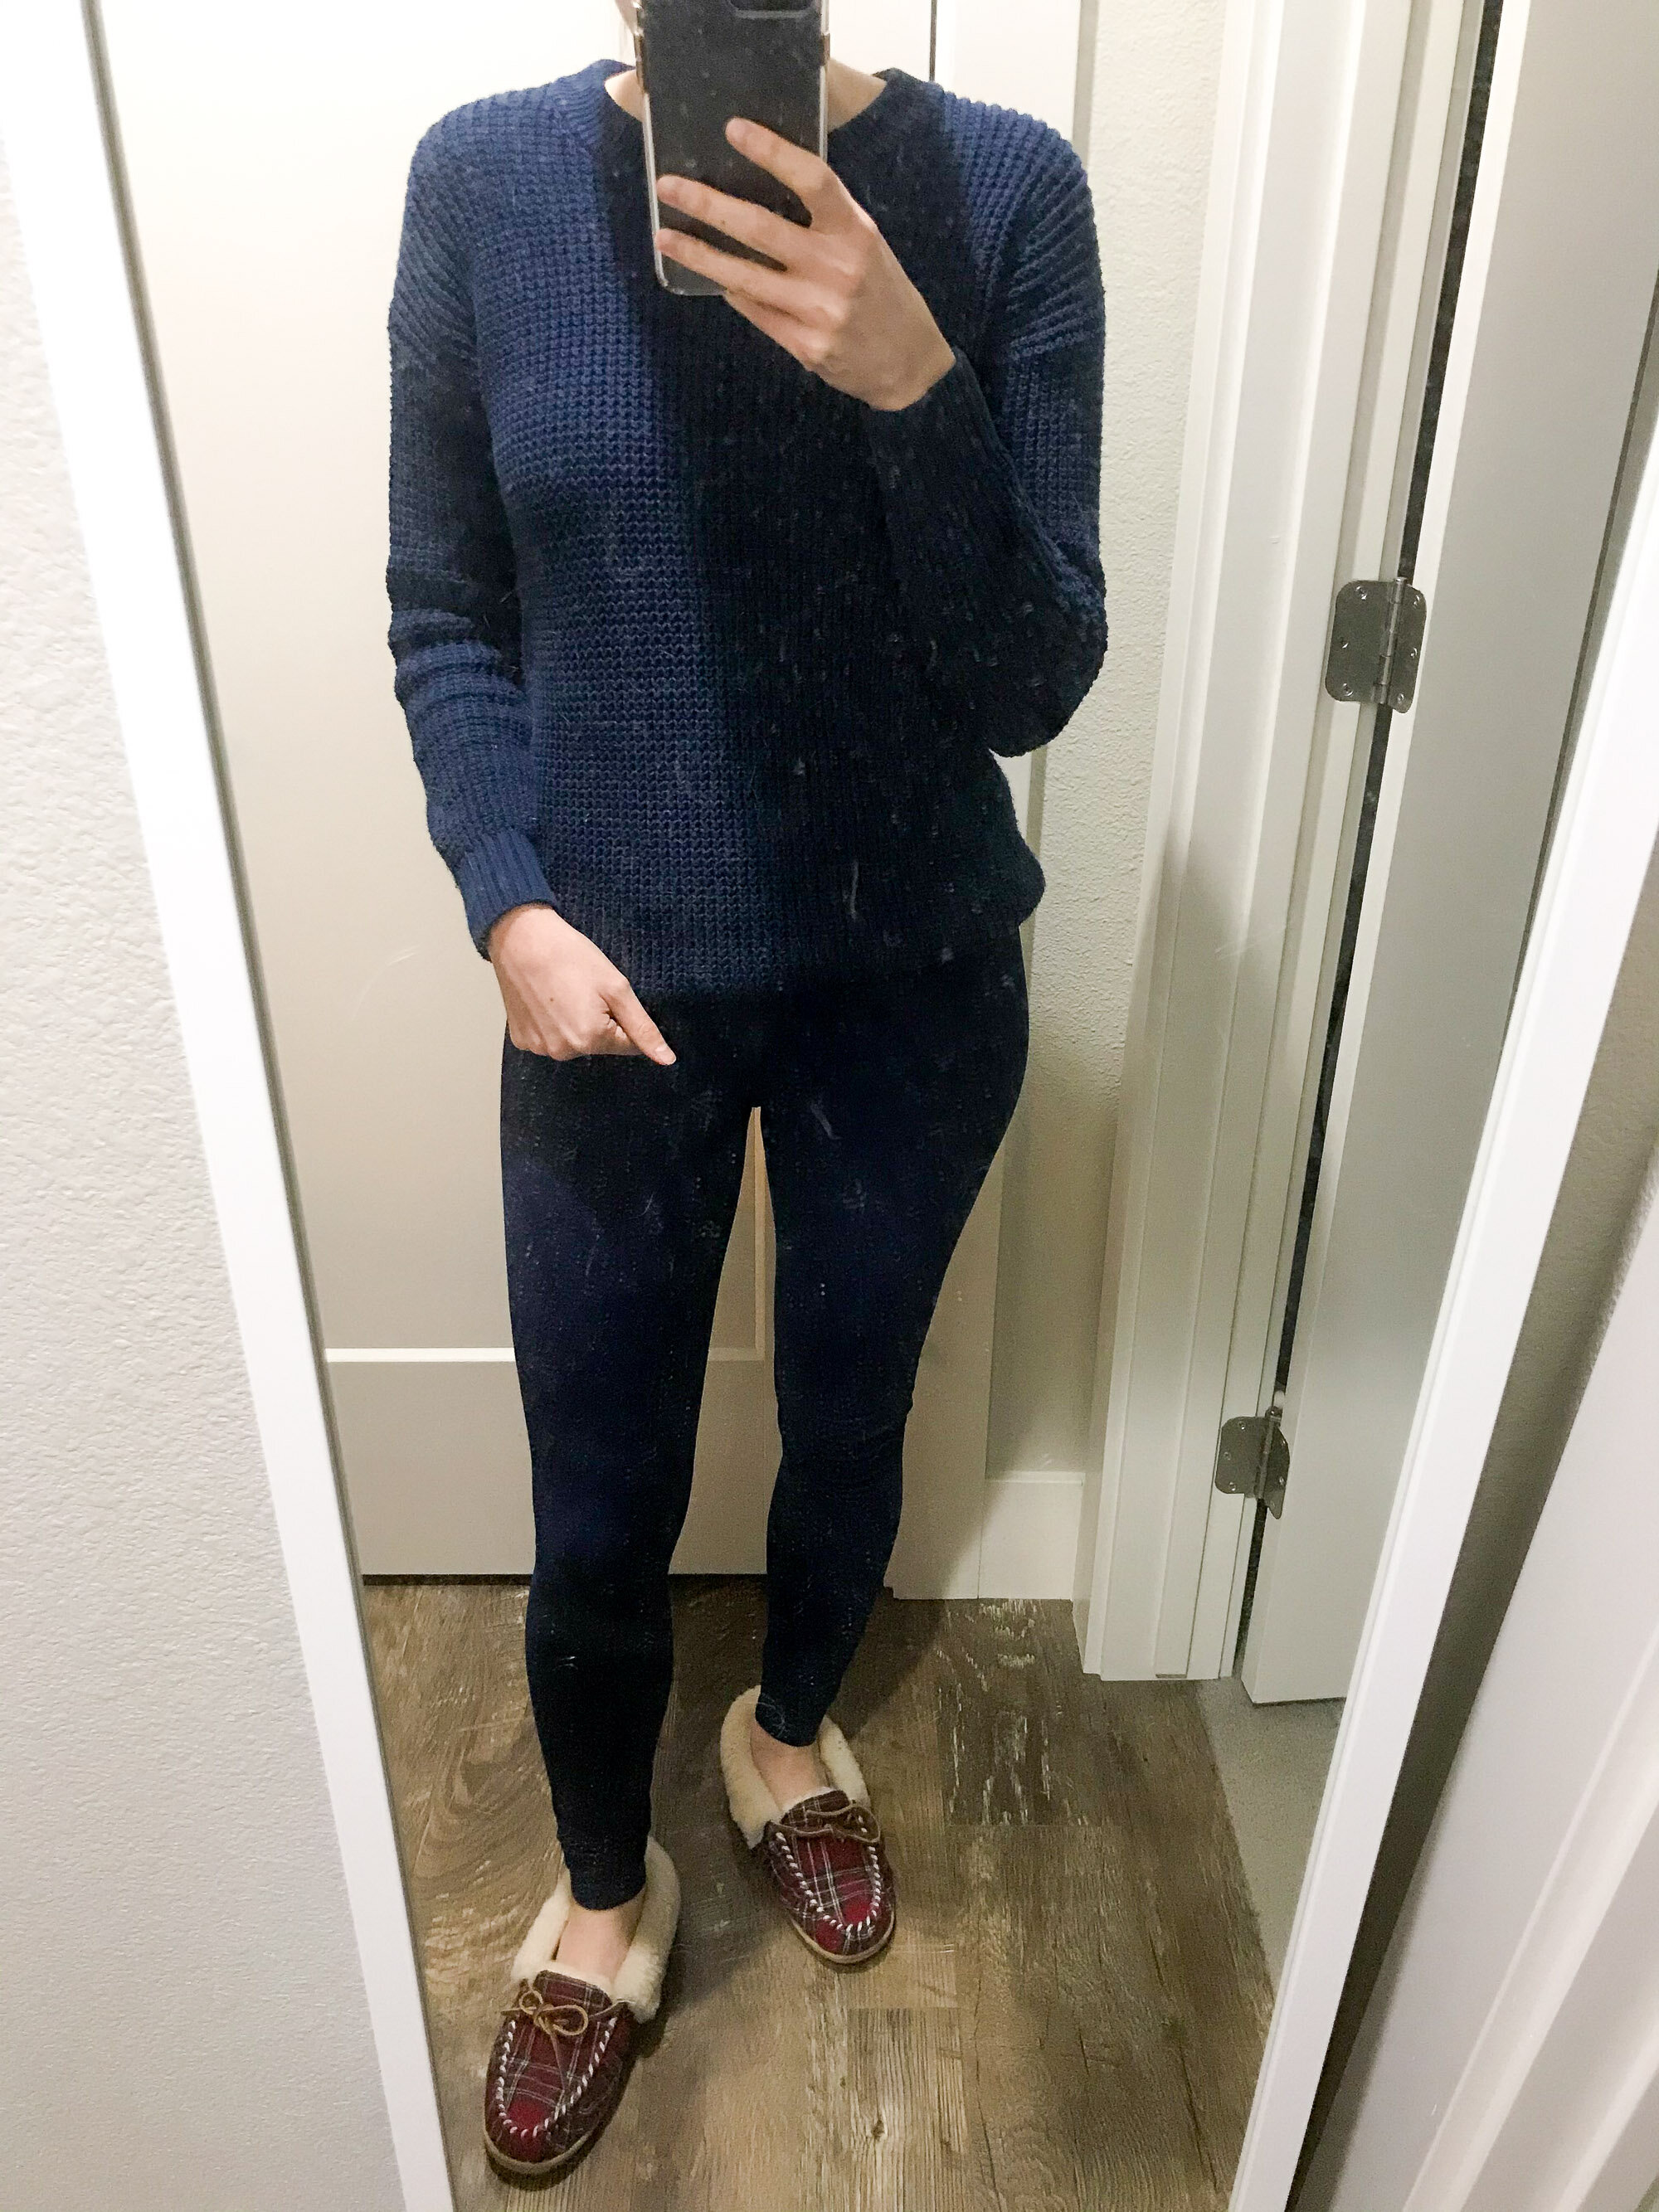 Work from home outfit: waffle knit sweater + leggings — Cotton Cashmere Cat Hair